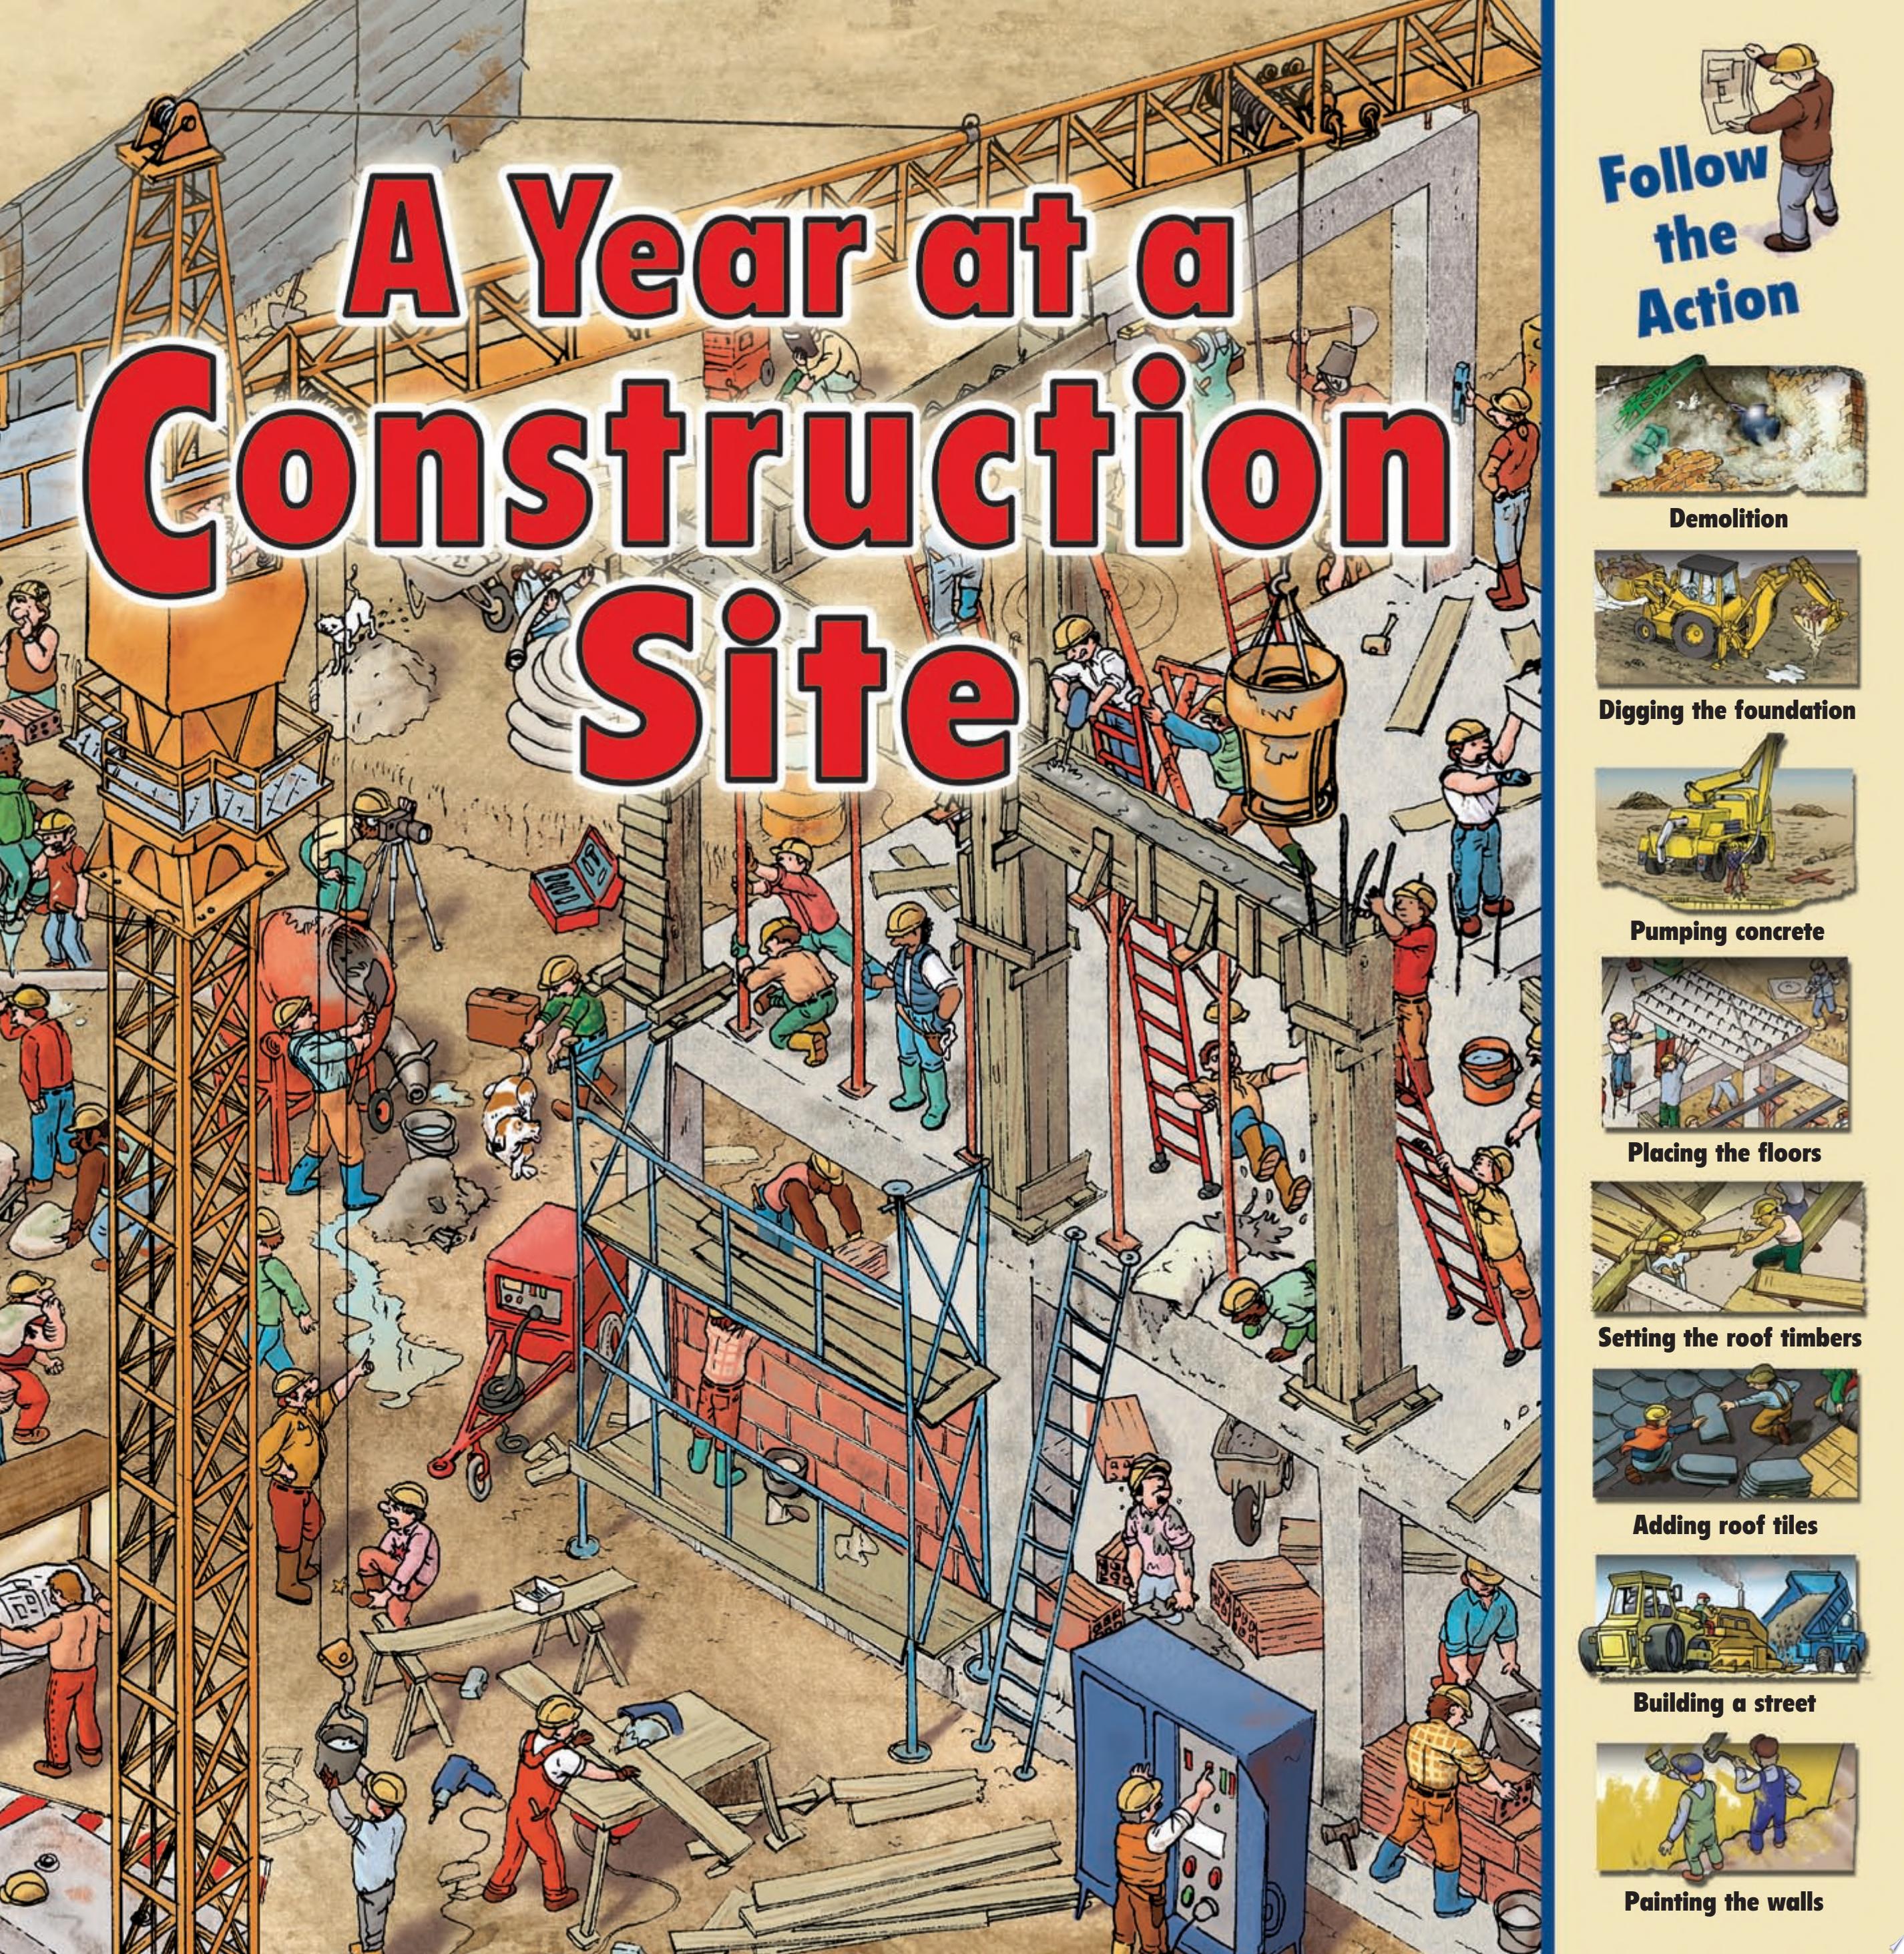 Image for "A Year at a Construction Site"